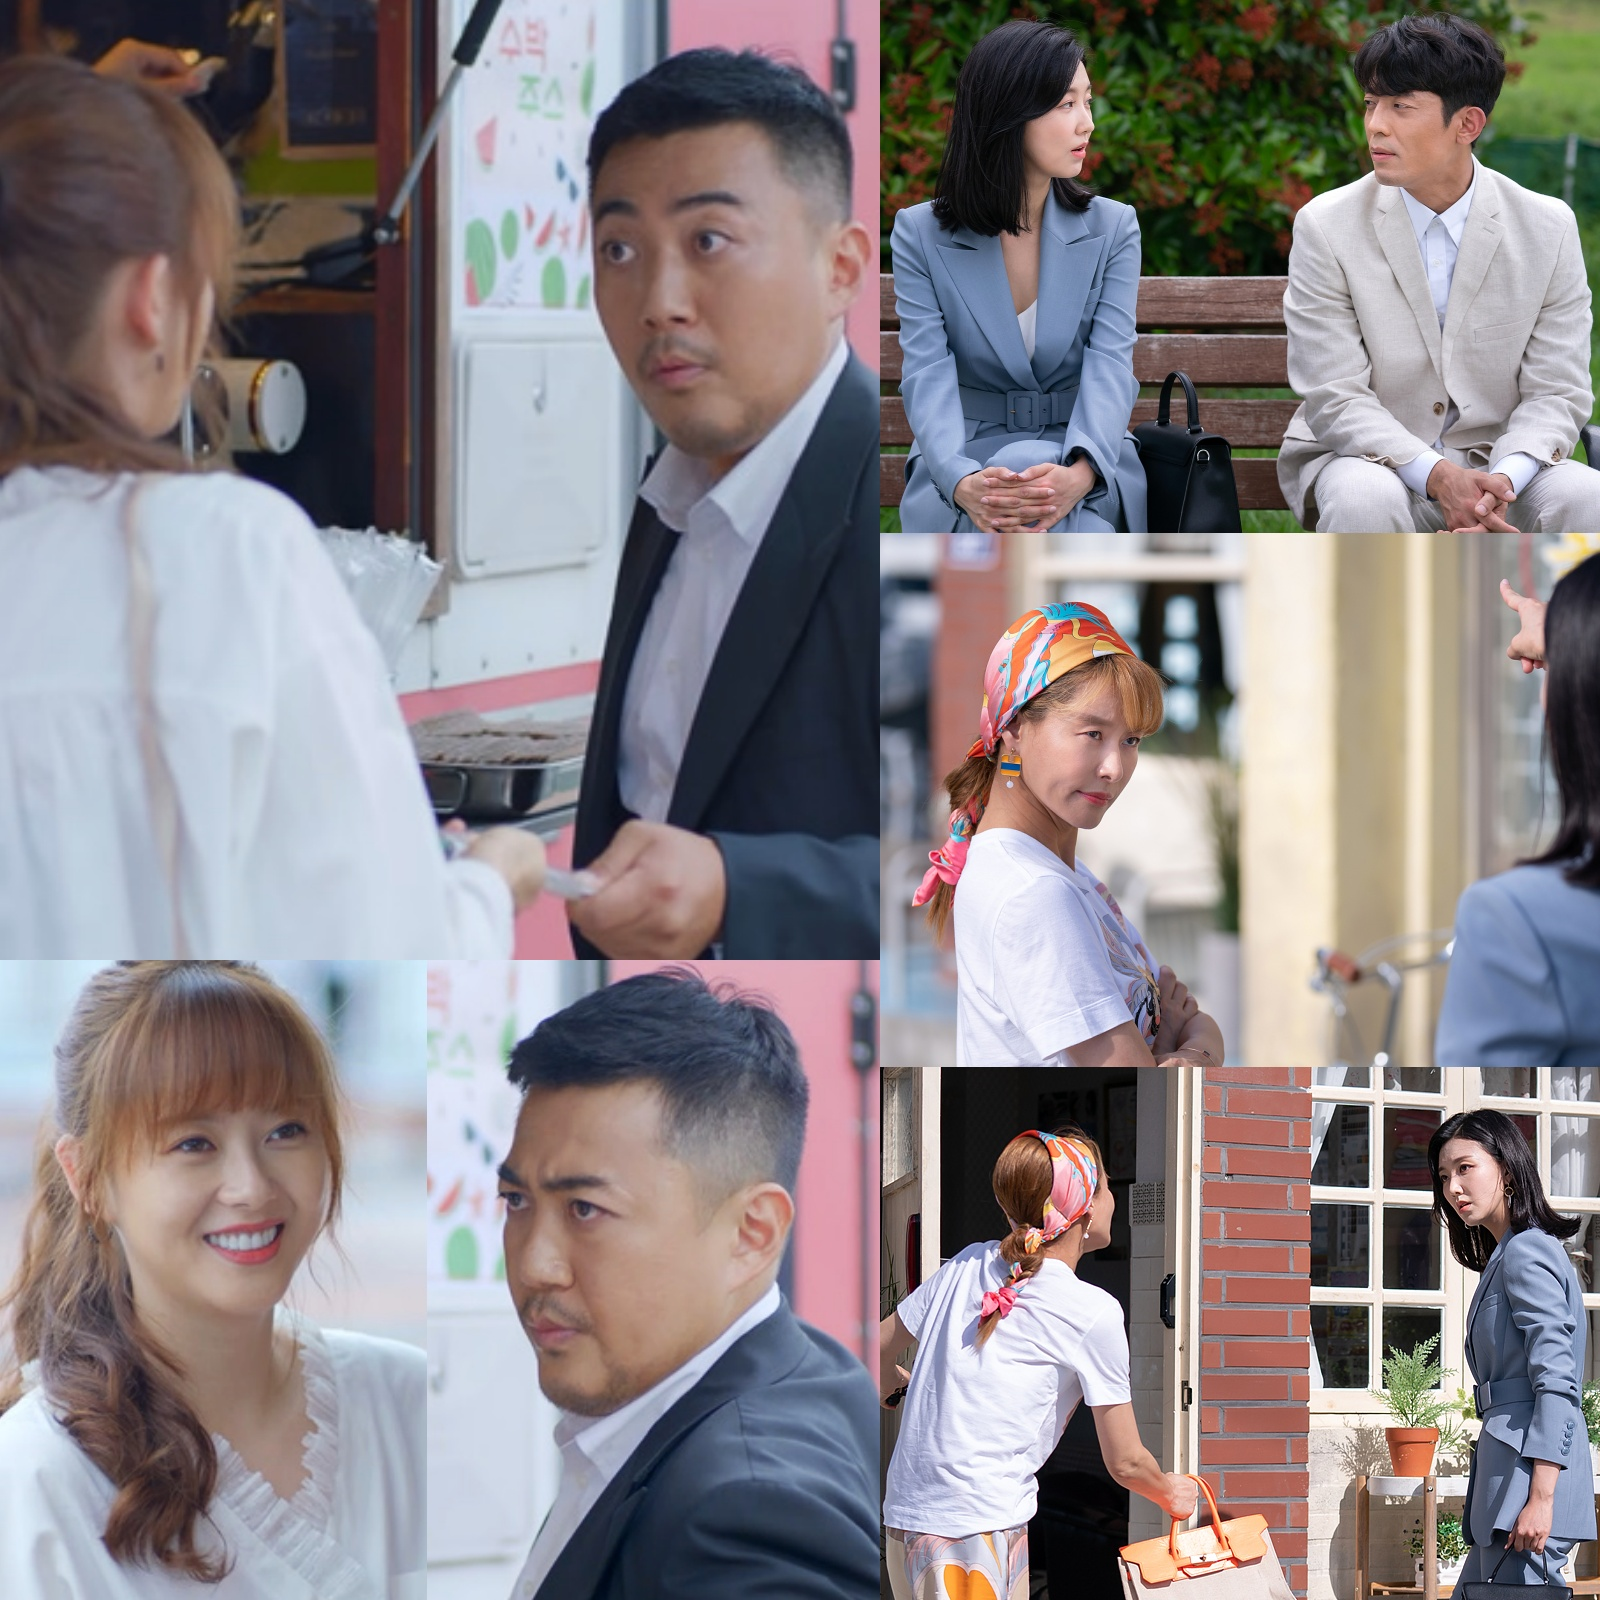 maekyung.com news teamDo Do Sol Sol La Sol features Villan (?) who will make peaceful silver bullshit.On the 20th, KBS2 drama Do Do Sol Sol La Sol released a steel with two shots of Gurara (orphanage) and the questionable man Minsu (The best tour now).The scene of serious conversation between the couple Cha Eun-seok (Kim Joo-heon), Oh Young-joo (Lee Seo-an), and Jin Sook-kyung (Ye Ji-won), who shines his eyes unusually in the appearance of a strange stranger, are also caught and stimulate curiosity.Gurara, who started the laughing rehabilitation starting with La La Land, and still a secret youth Sun Woo Jun.The people of the Eunpo village, which is full of personality and intertwined with the two youths, are adding warm healing to the pole.In the meantime, the photos show Chu and Oh Young-ju finding a silver gun, causing tension.First, Minsu, a questionable man who is chasing Sun Woo Jun, narrows the siege and appears in the silver foil to stimulate curiosity.Here, I am caught in a nervous battle over the worlds sunny Gura and La La Land Goods, and I laugh for some reason.I wonder why he faced Gurara and why he did not notice the existence of Sun Woo Jun.The meeting between Cha Eun-seok and Oh Young-ju in the ensuing photo is also interesting. Mr. Cha Eun-seok, a Kidari uncle who was always friendly to Gurara, looks at his ex-wife Oh Young-joo with a dry expression.Oh Young-joo, who was cool until the moment of separation, ran to Eunpo to meet Cha Eun-seok and is standing in front of Jin Hair.Jin Sook-kyung, who is in the middle of the day, is giving a good look to Oh Young-joo, a stranger who is snooping around in front of Jin Hair.Oh Young-joo, who is caught by Jin Sook-kyung, a dry craftsman, makes me wonder about the future situation.I wonder why they appeared in peaceful silver, and what the appearance of poor villas that create unexpected situations will bring about the change that will come to silver.On the other hand, the Do Do Sol Sol La La Sol will be held at KBS2 at 9:30 pm on the 21st